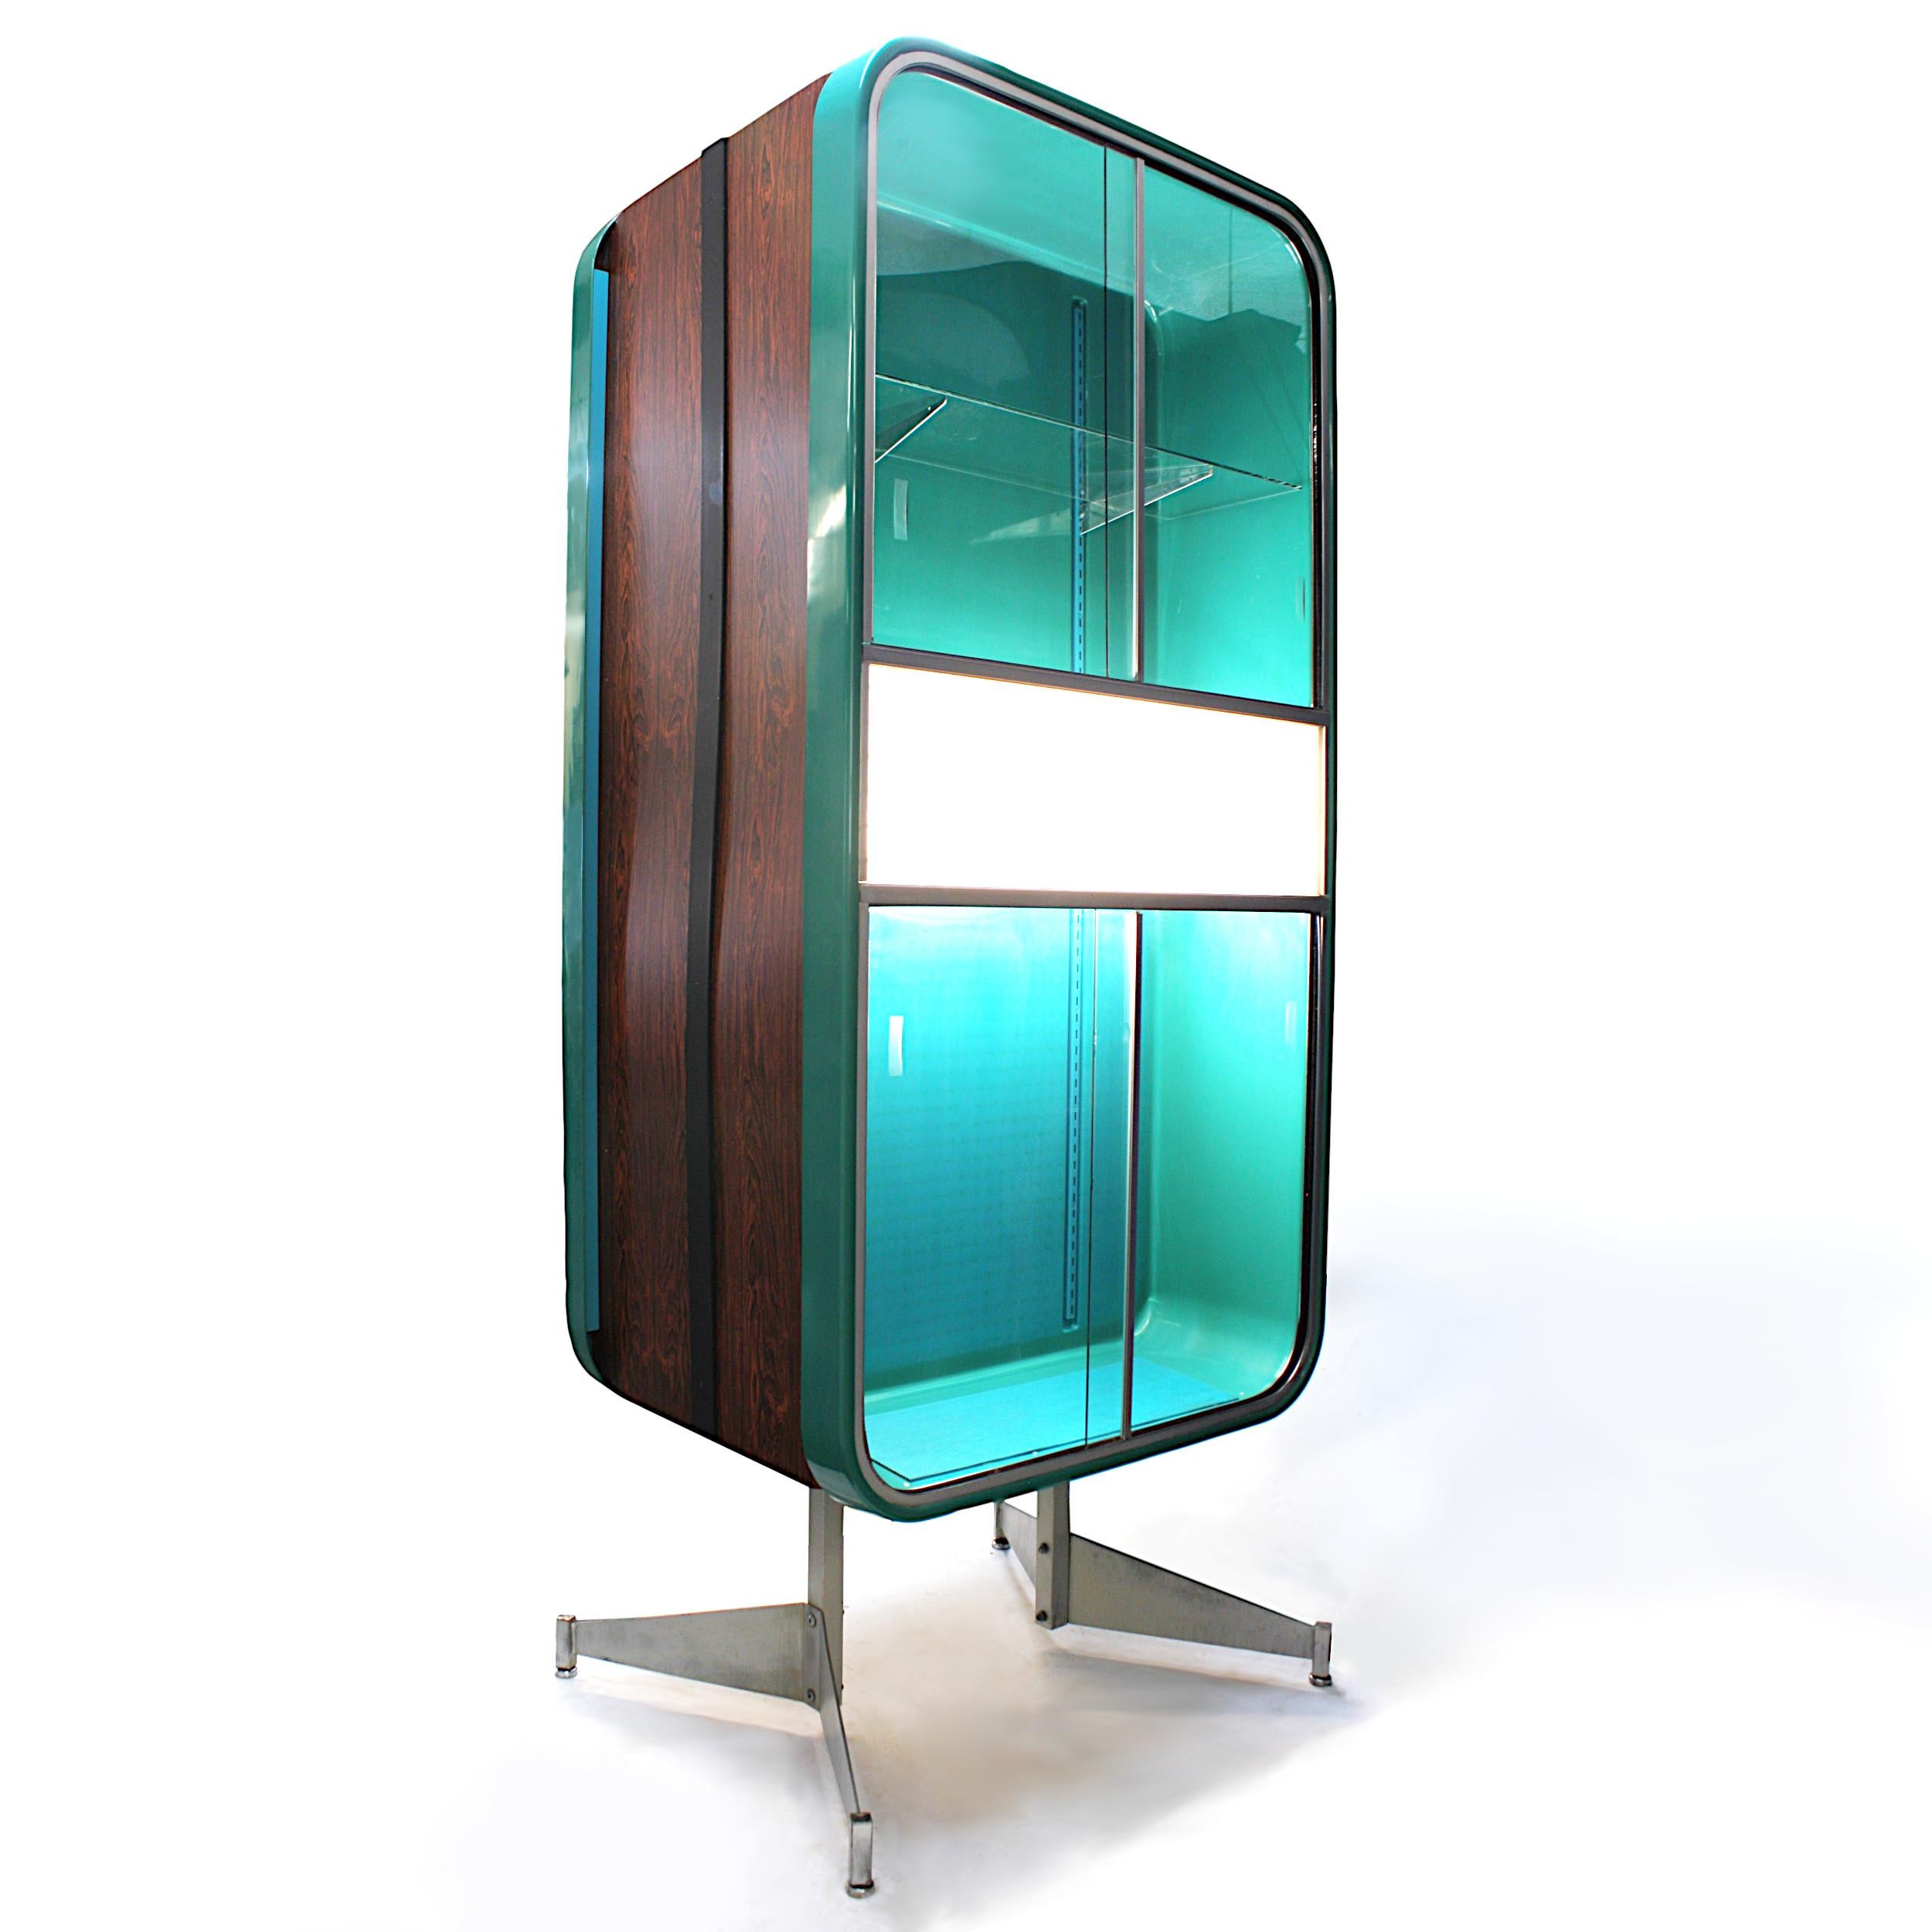 This seriously cool piece is a rare, original parts display cabinet from a 1960s GM dealership. Cabinet features 2 huge (36.5